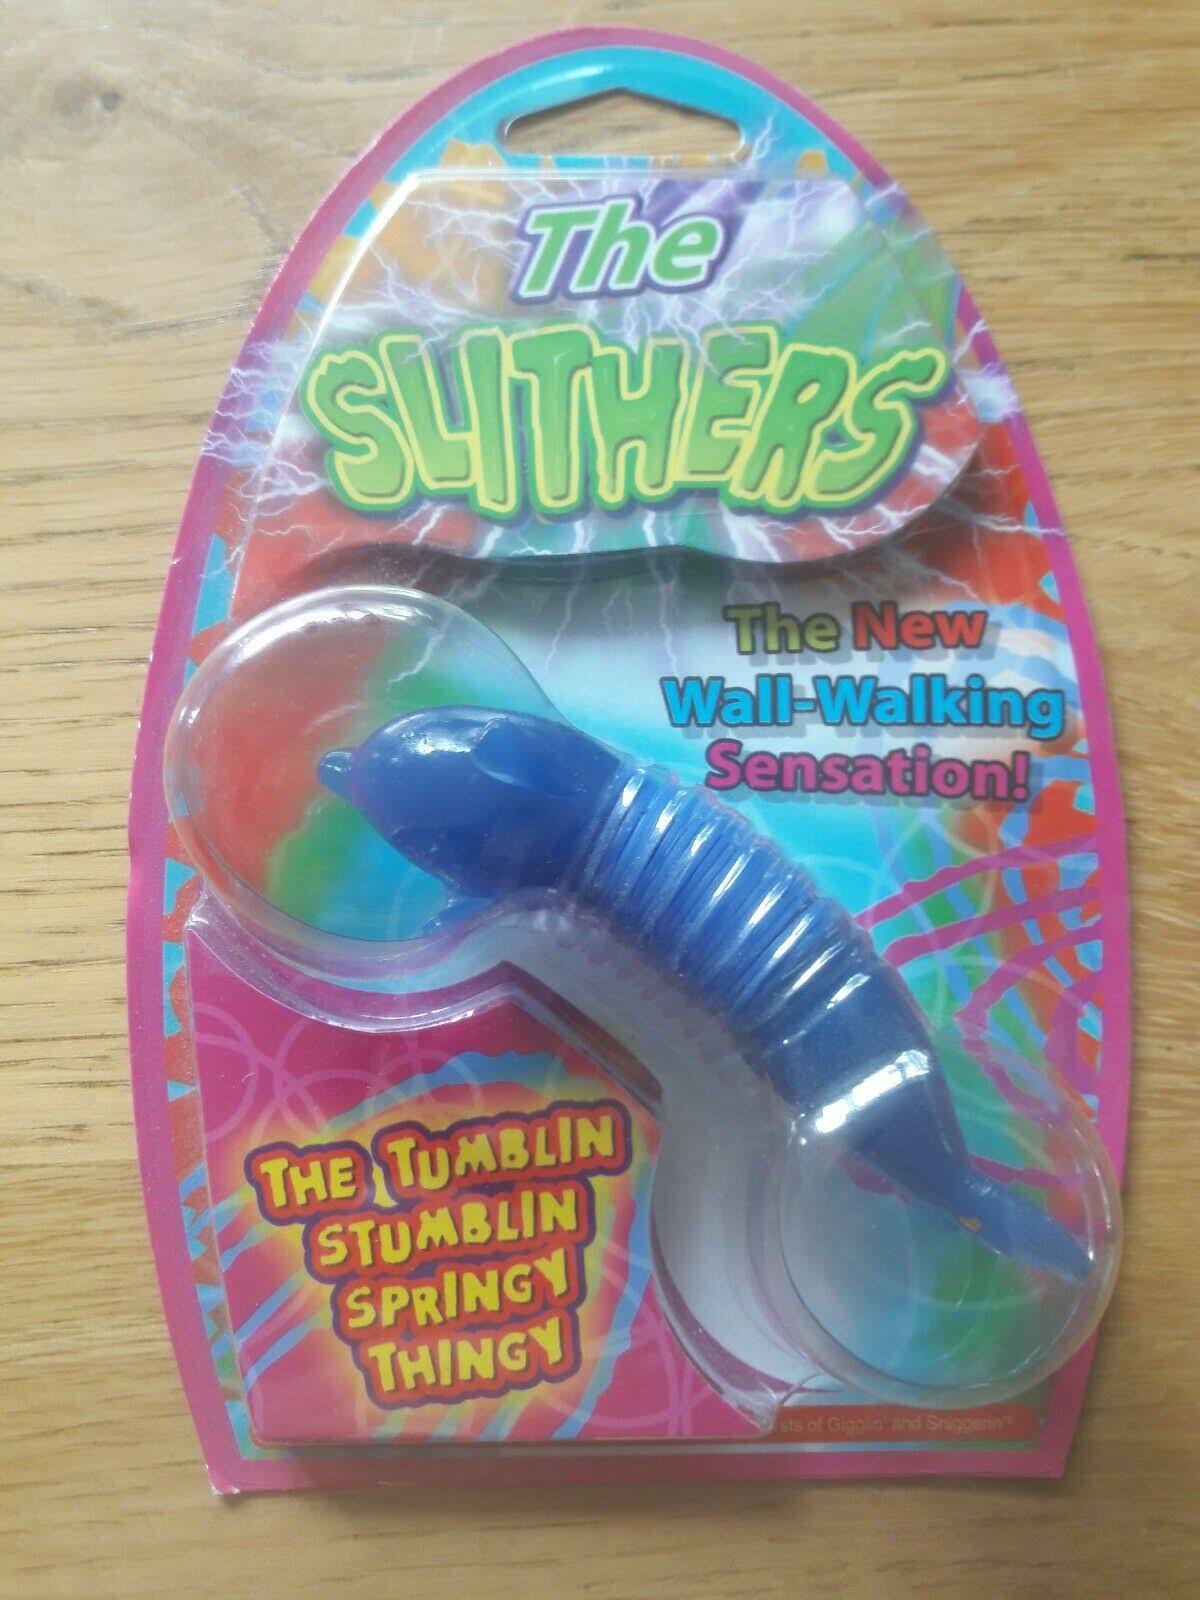 The Slithers The New Wall-Walking Sensation Toy